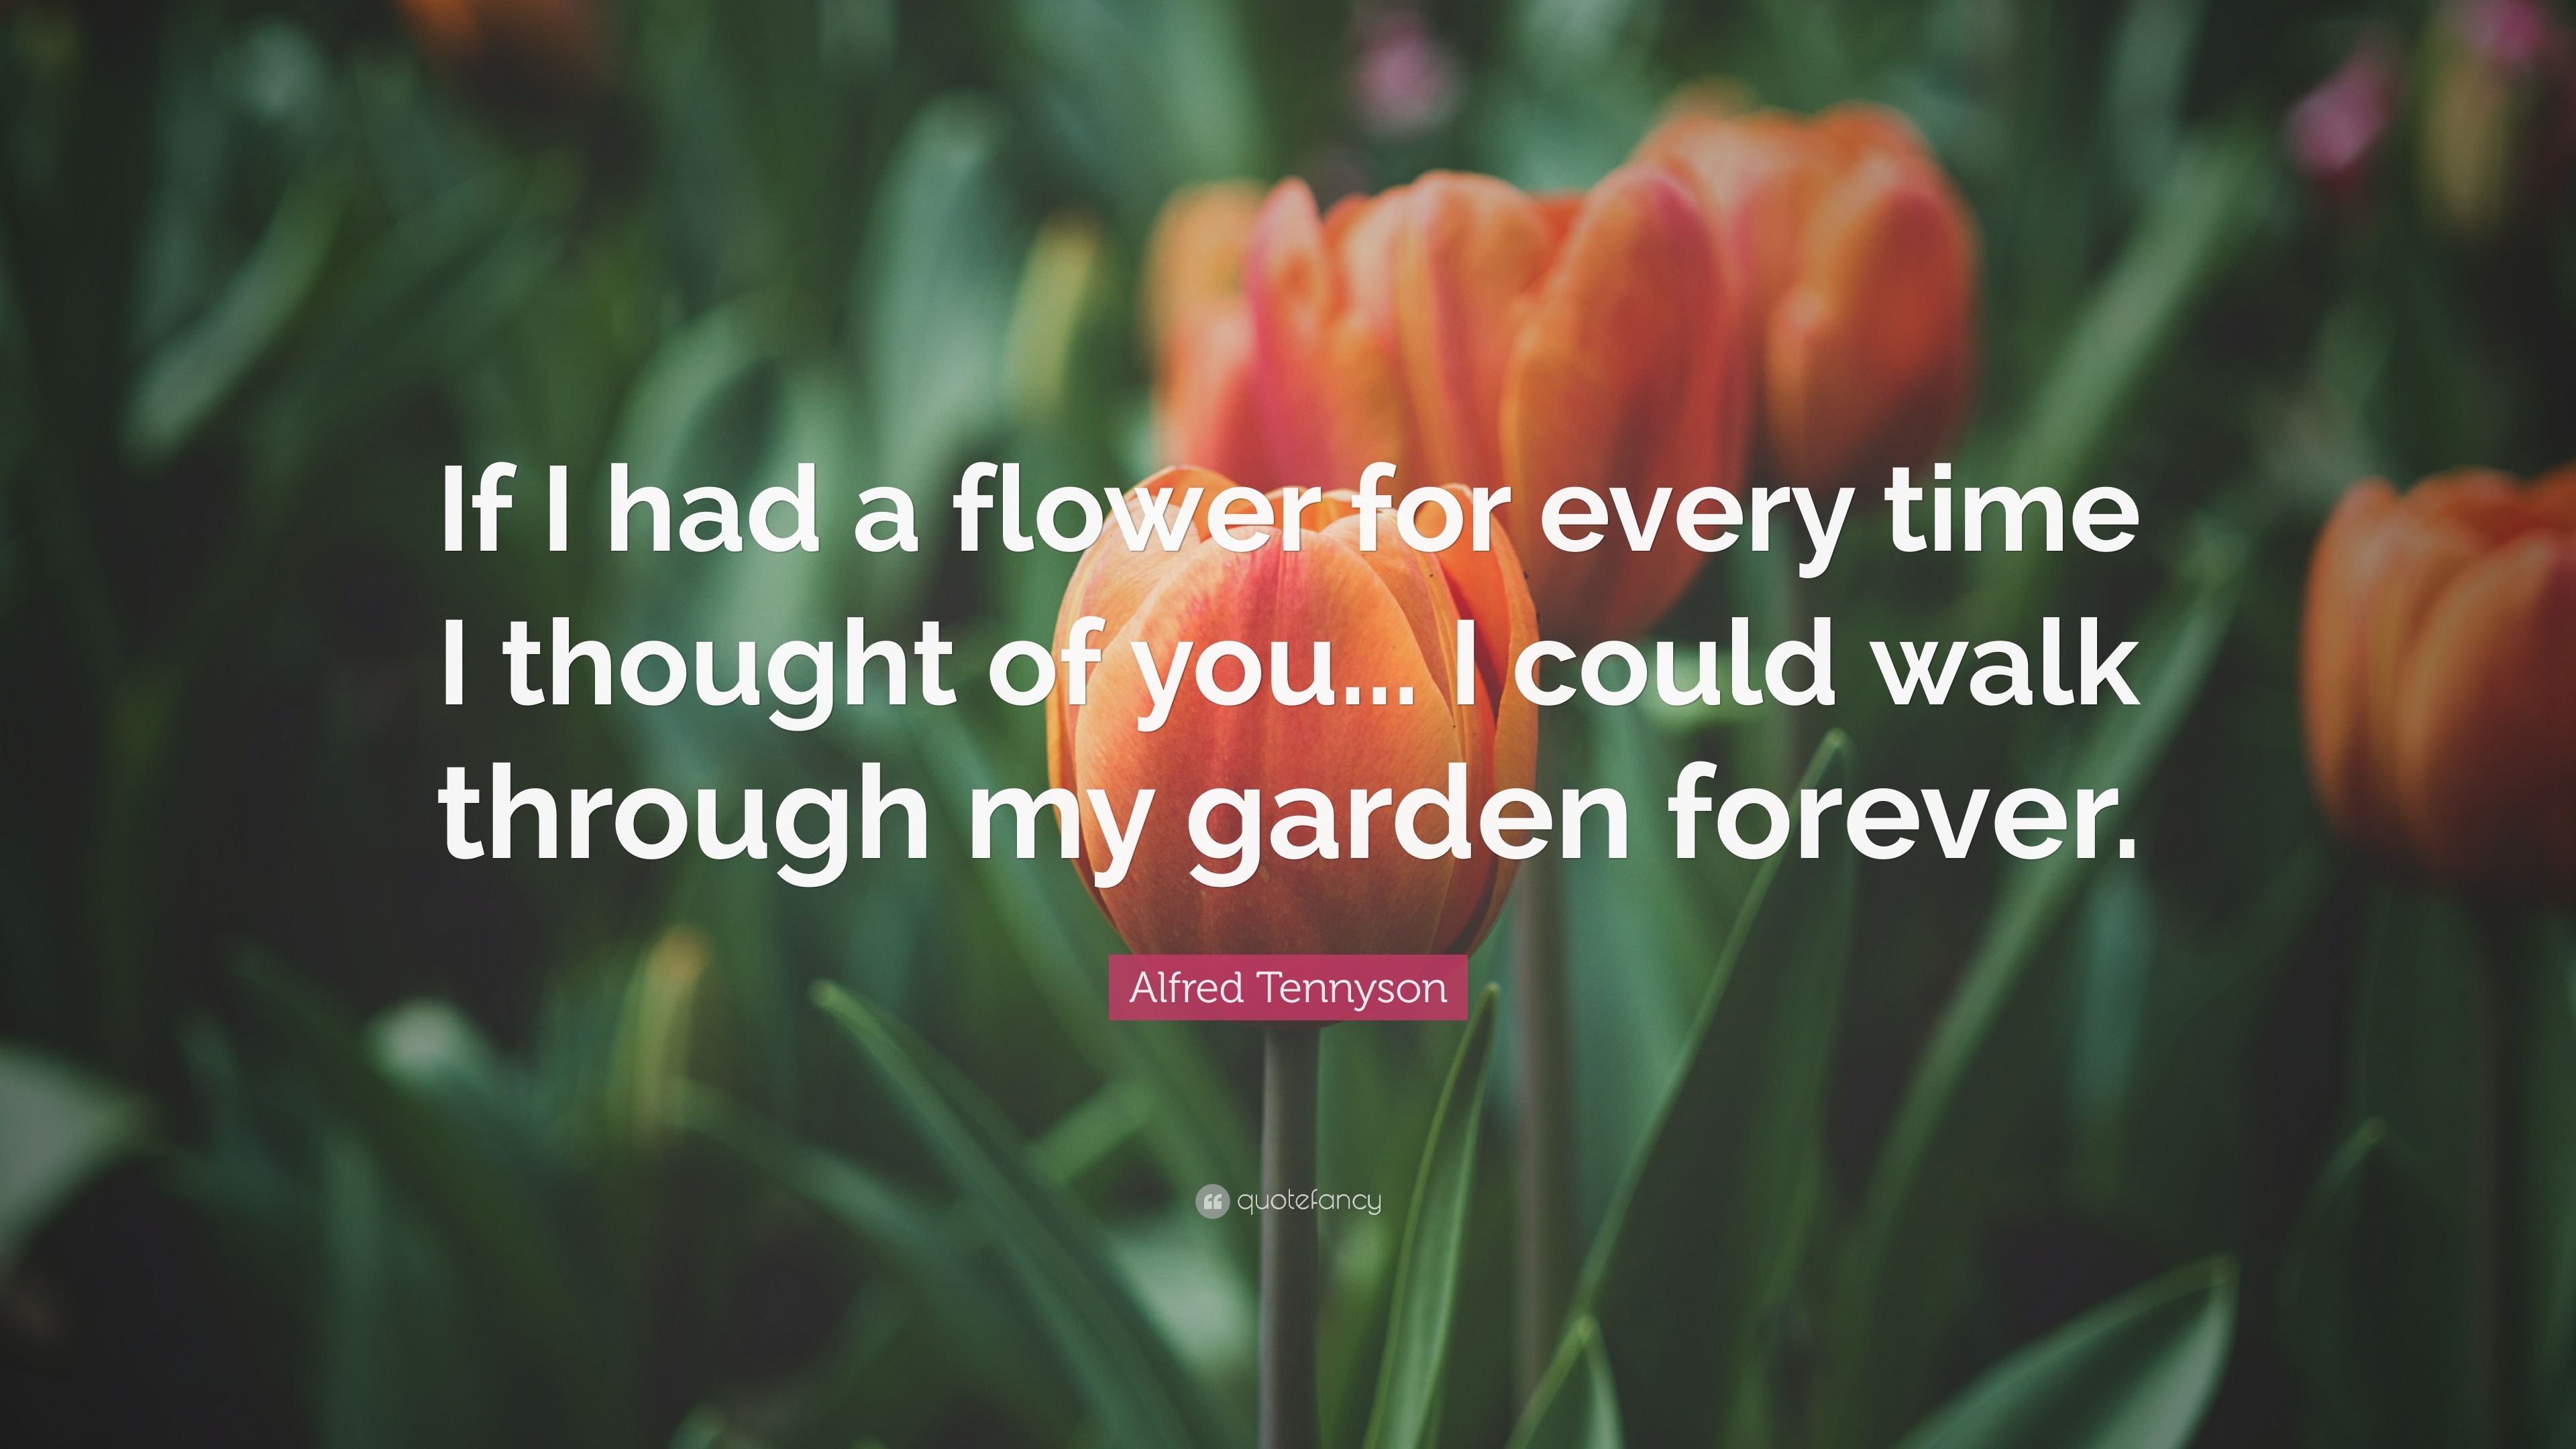 If I had a flower for every time I thought of you… I could walk through my garden forever.